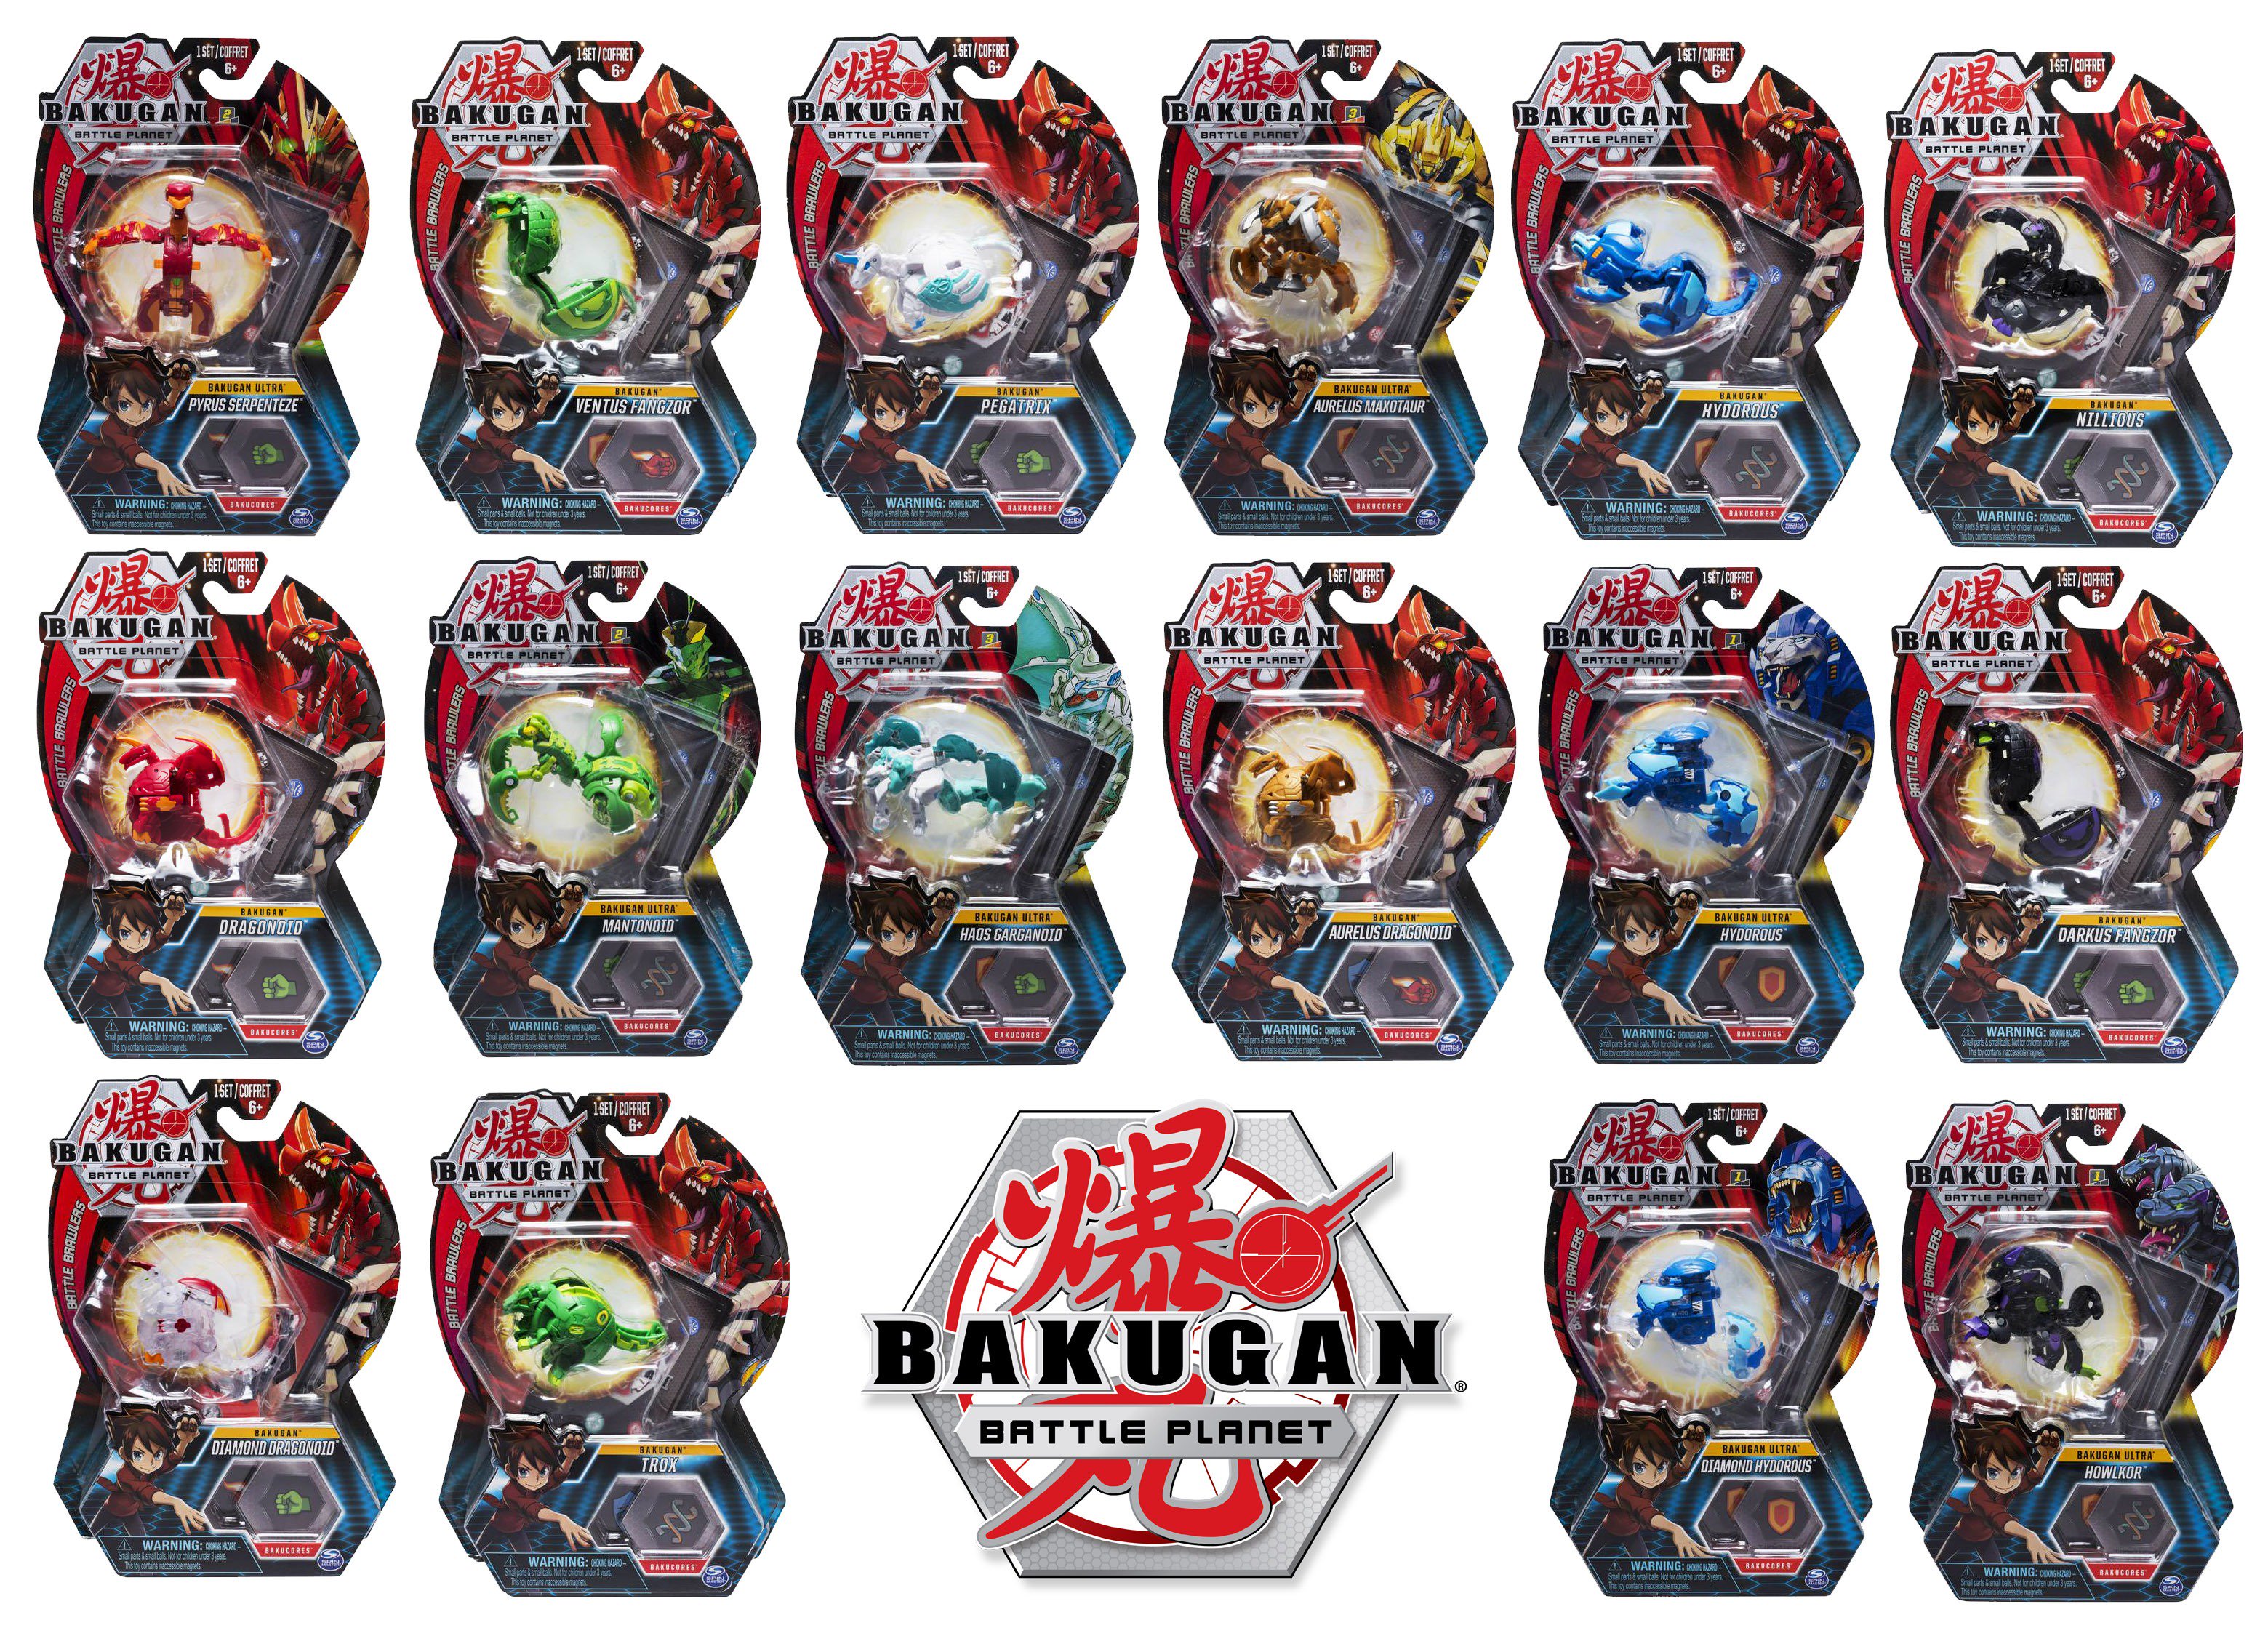 Brawler Café ar Twitter: "Thanks to Shogo from the Bakugan Wiki Discord compiling all the single Bakugan toy images one Which Bakugan are you most excited for in